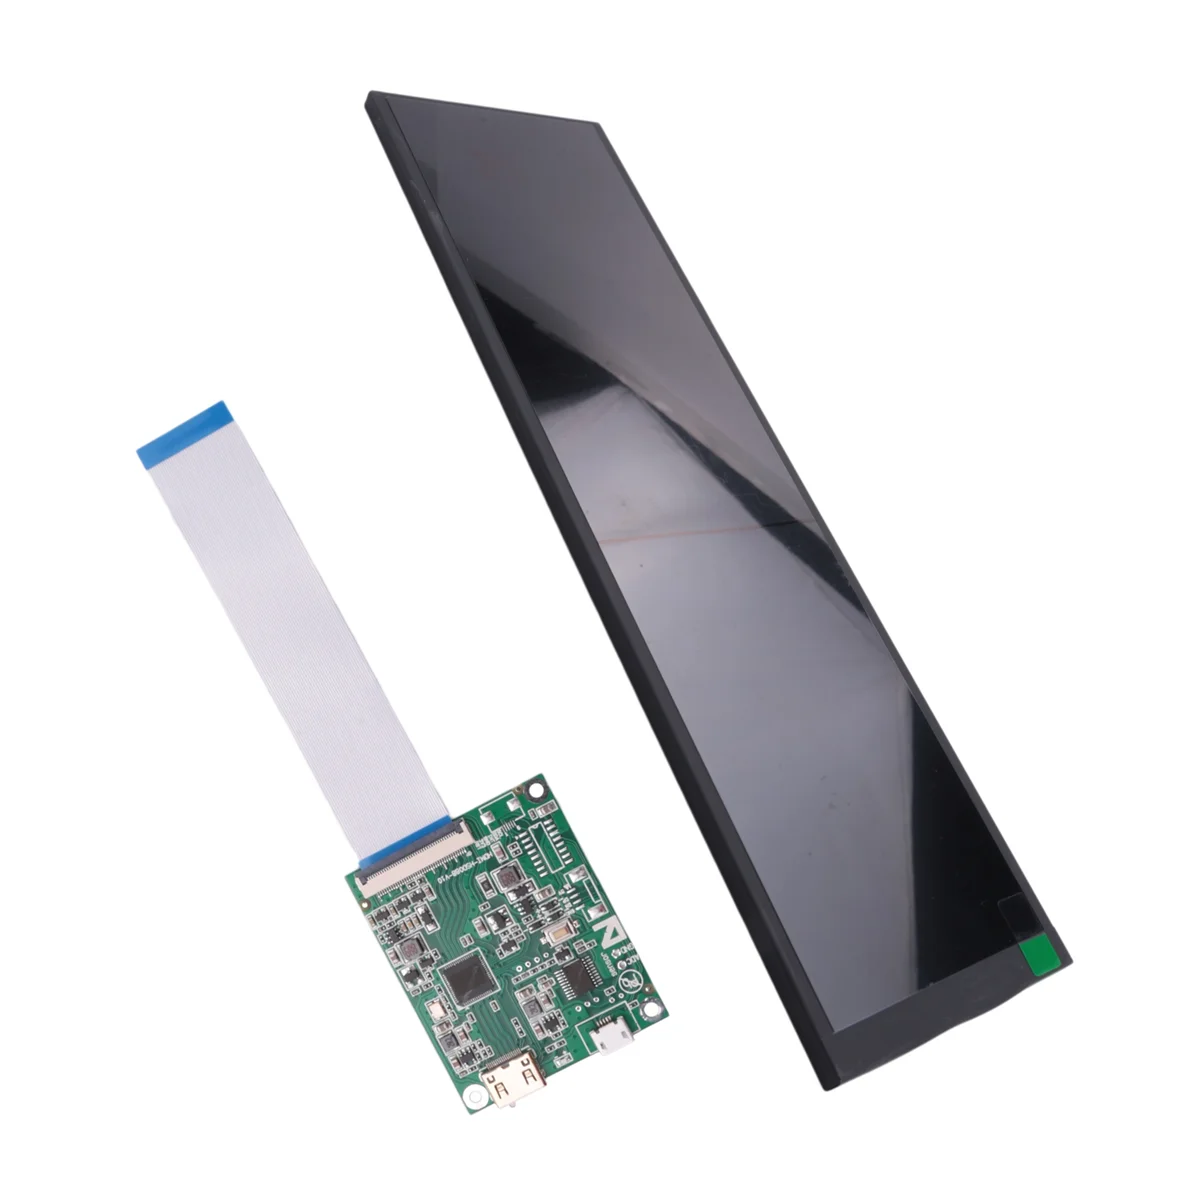 

8.8-Inch 1920X480 Resolution 600-Brightness Bar LCD Display, MIPI Interface, HSD088IPW1-A00 with Driver Board